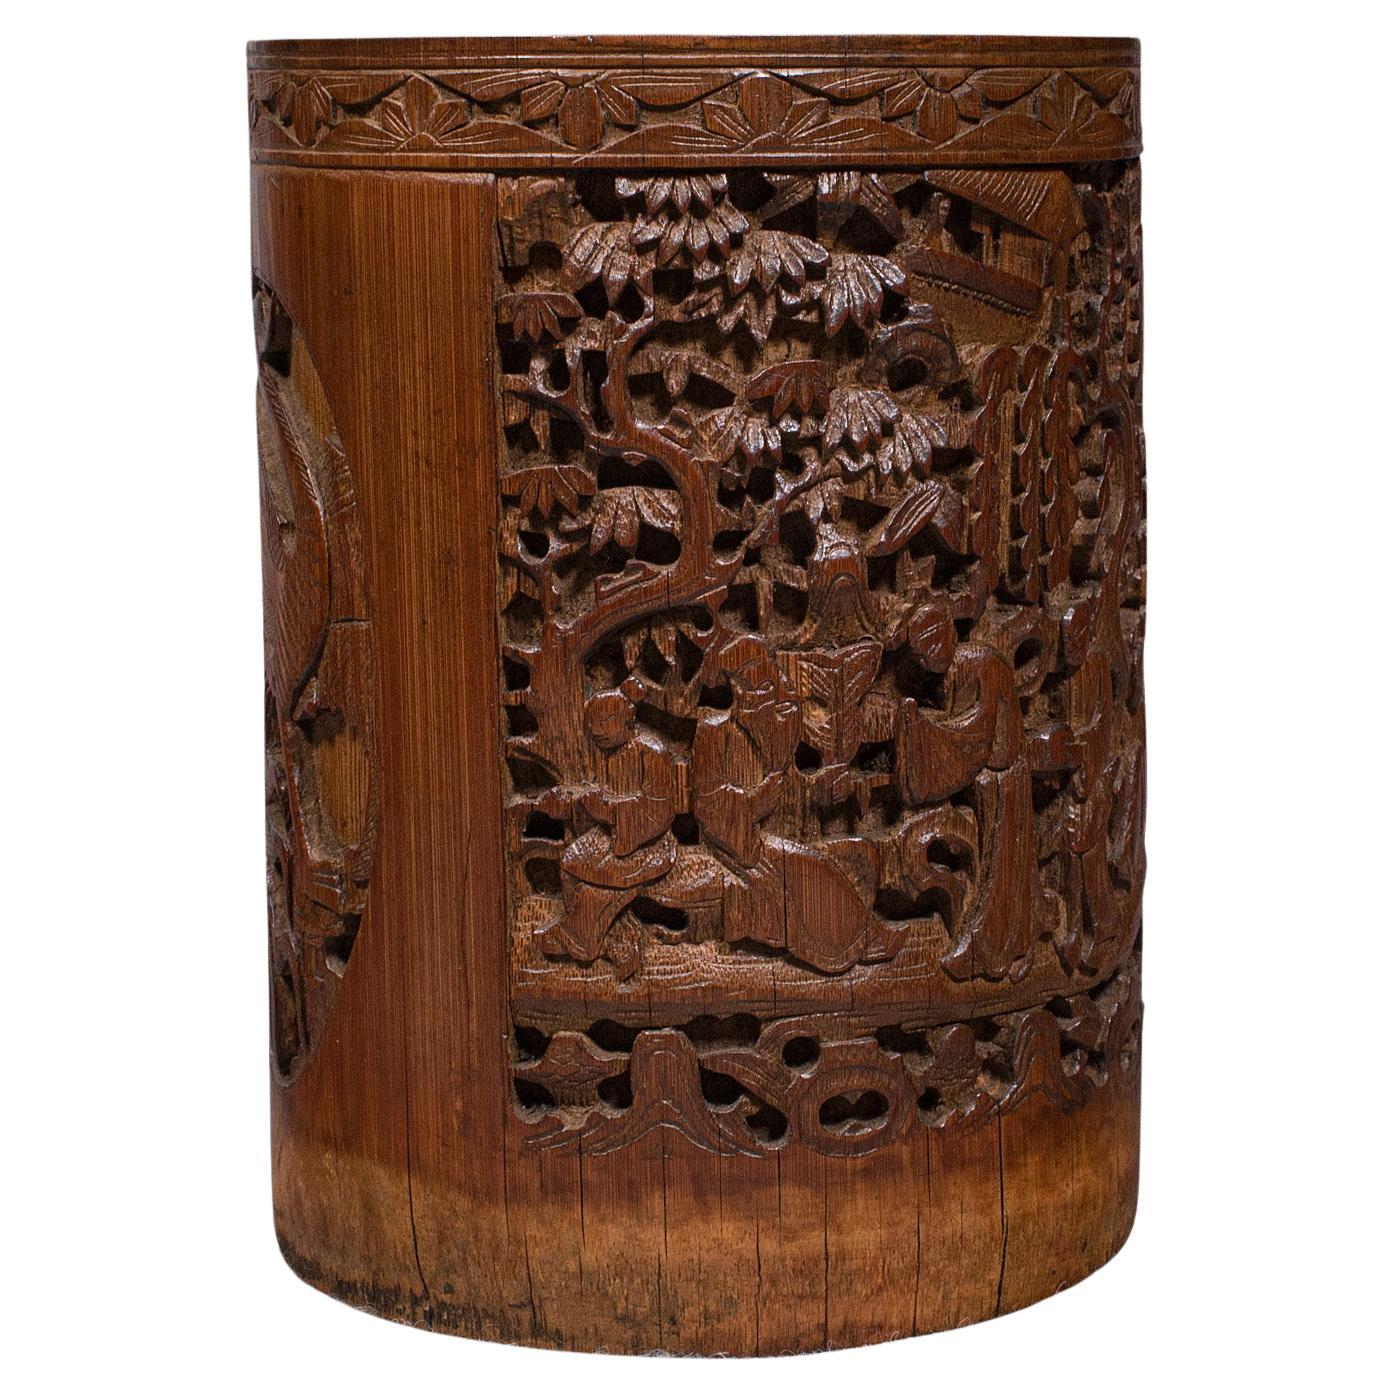 Antique Artist's Brush Pot, Chinese, Carved Bamboo, Treen, Victorian, circa 1900 For Sale